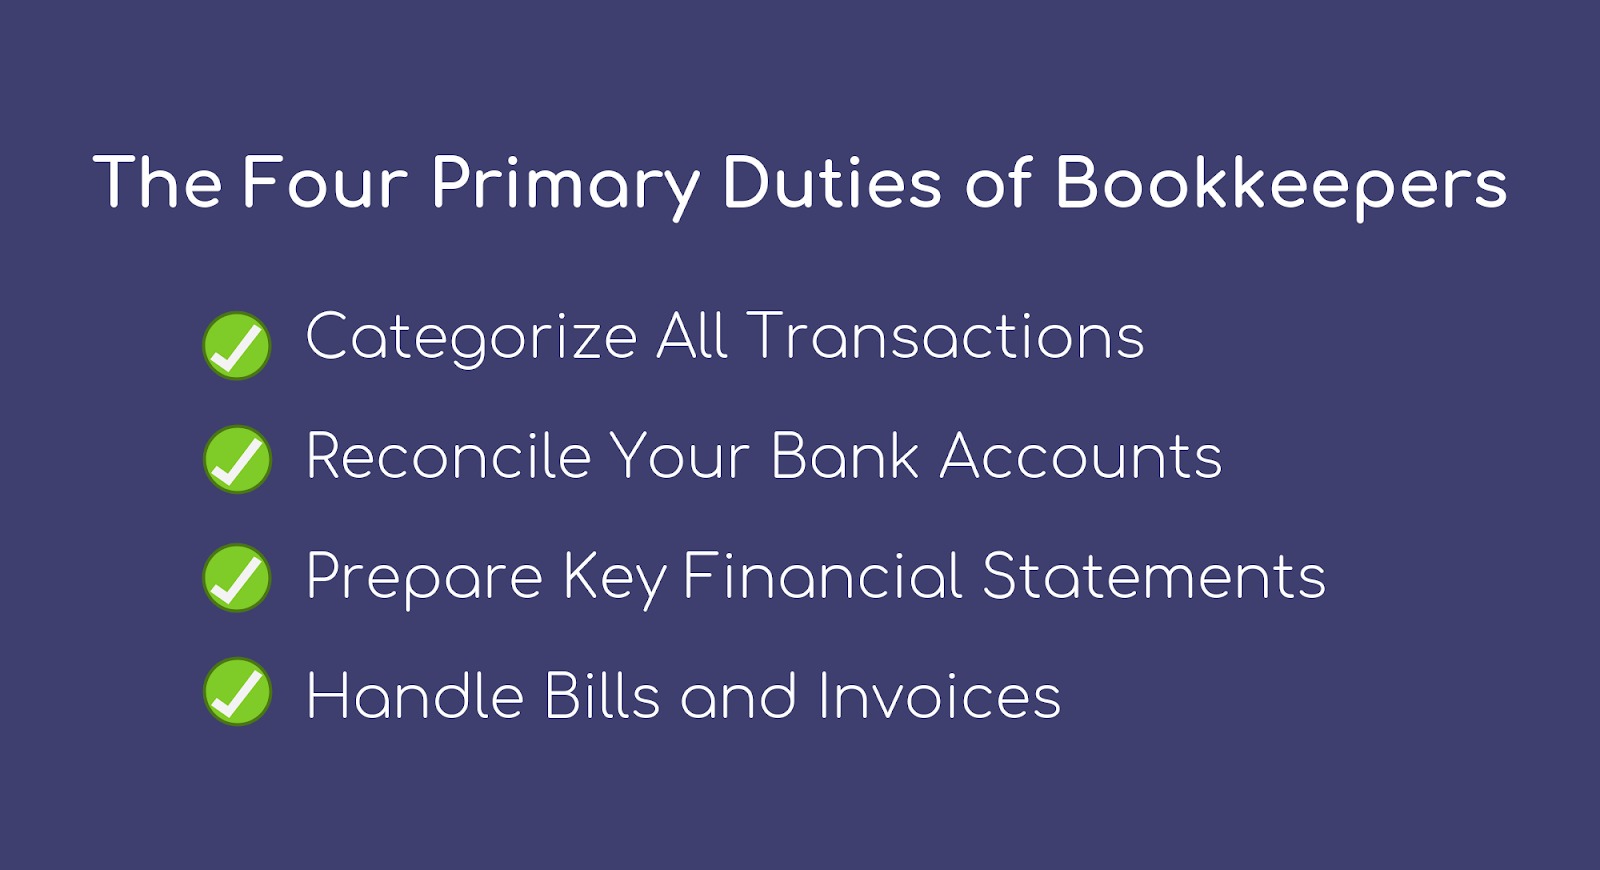 Image describing the duties and roles of a bookkeeper
